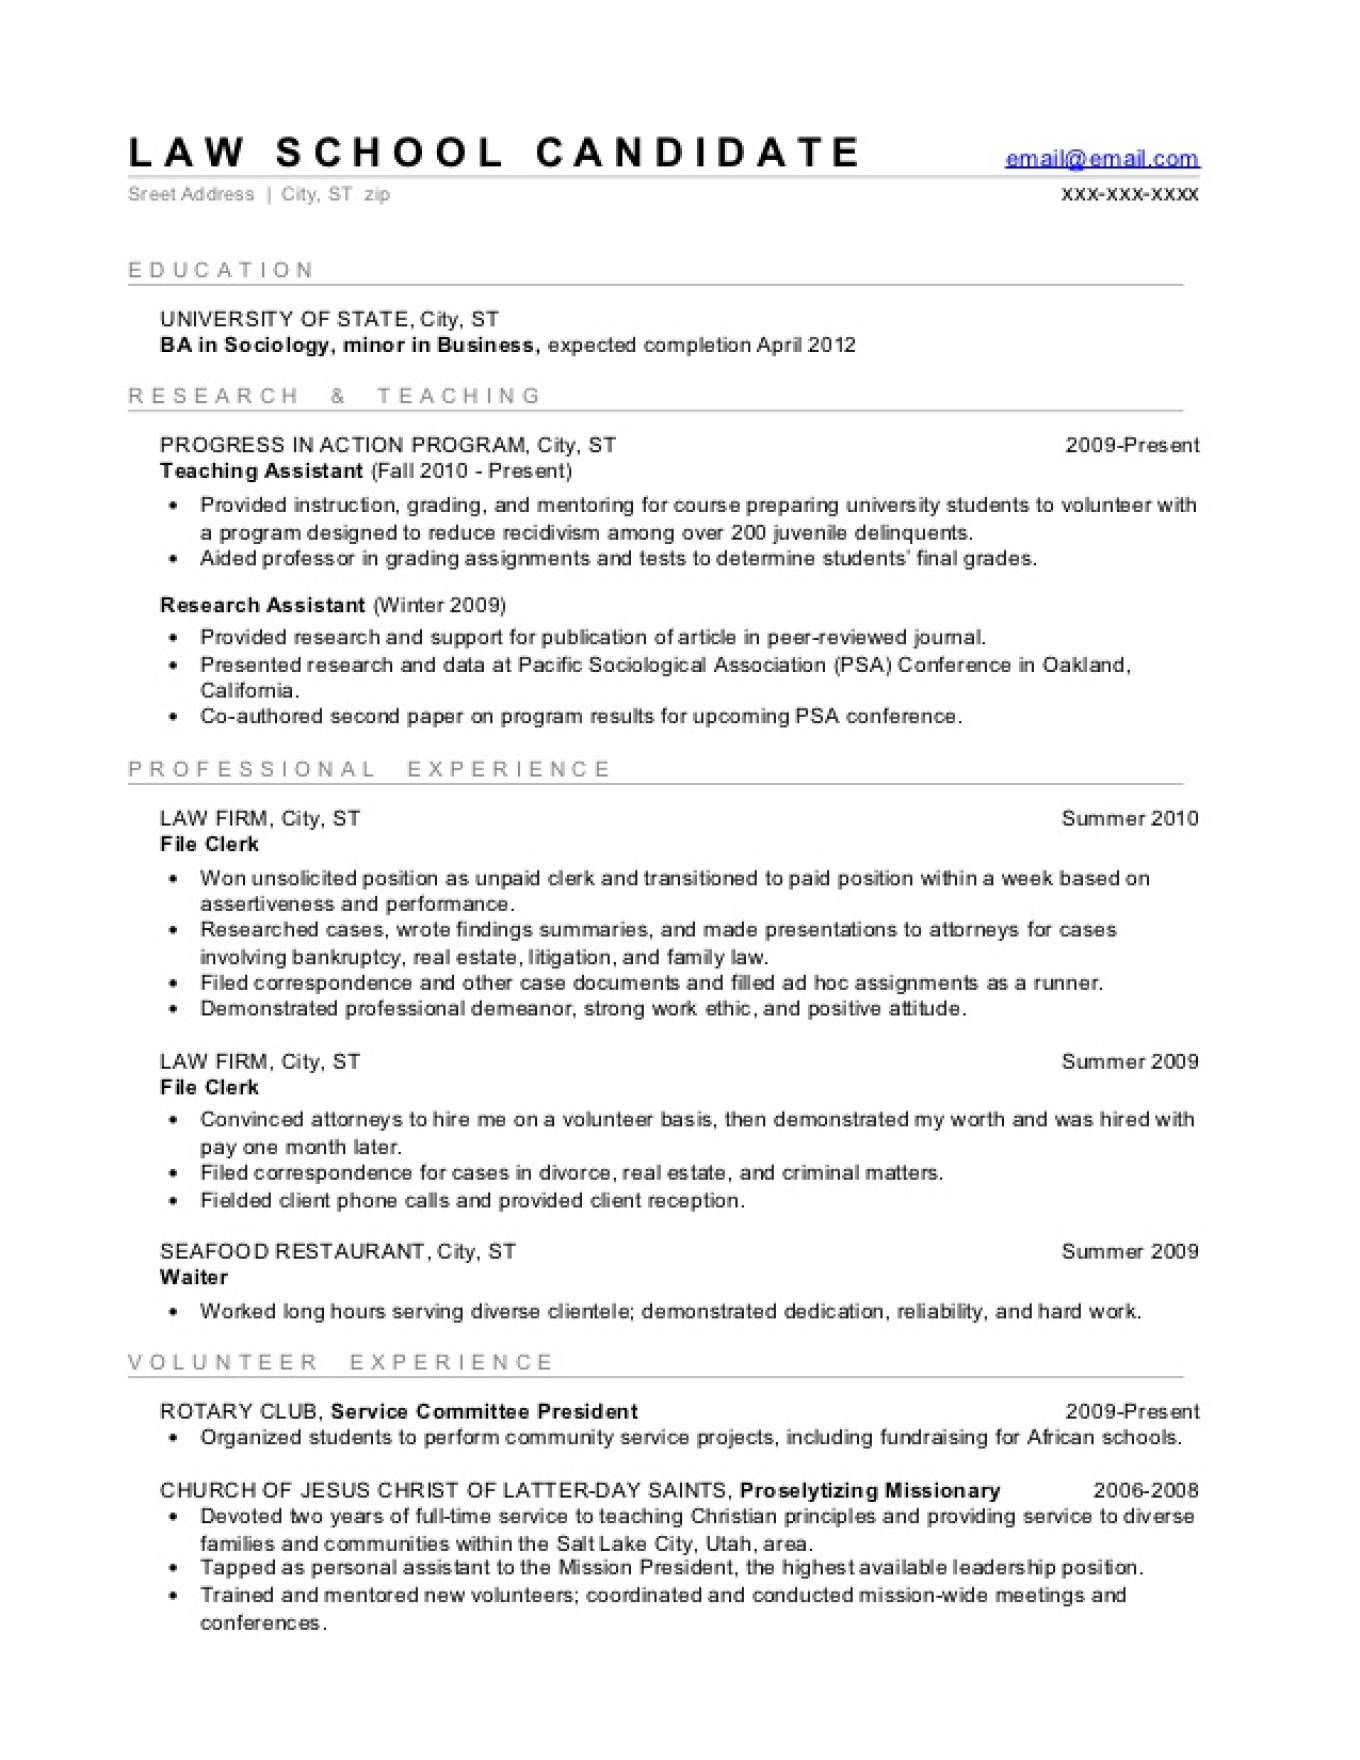 5 Law School Resume Templates: Prepping Your Resume for Law School